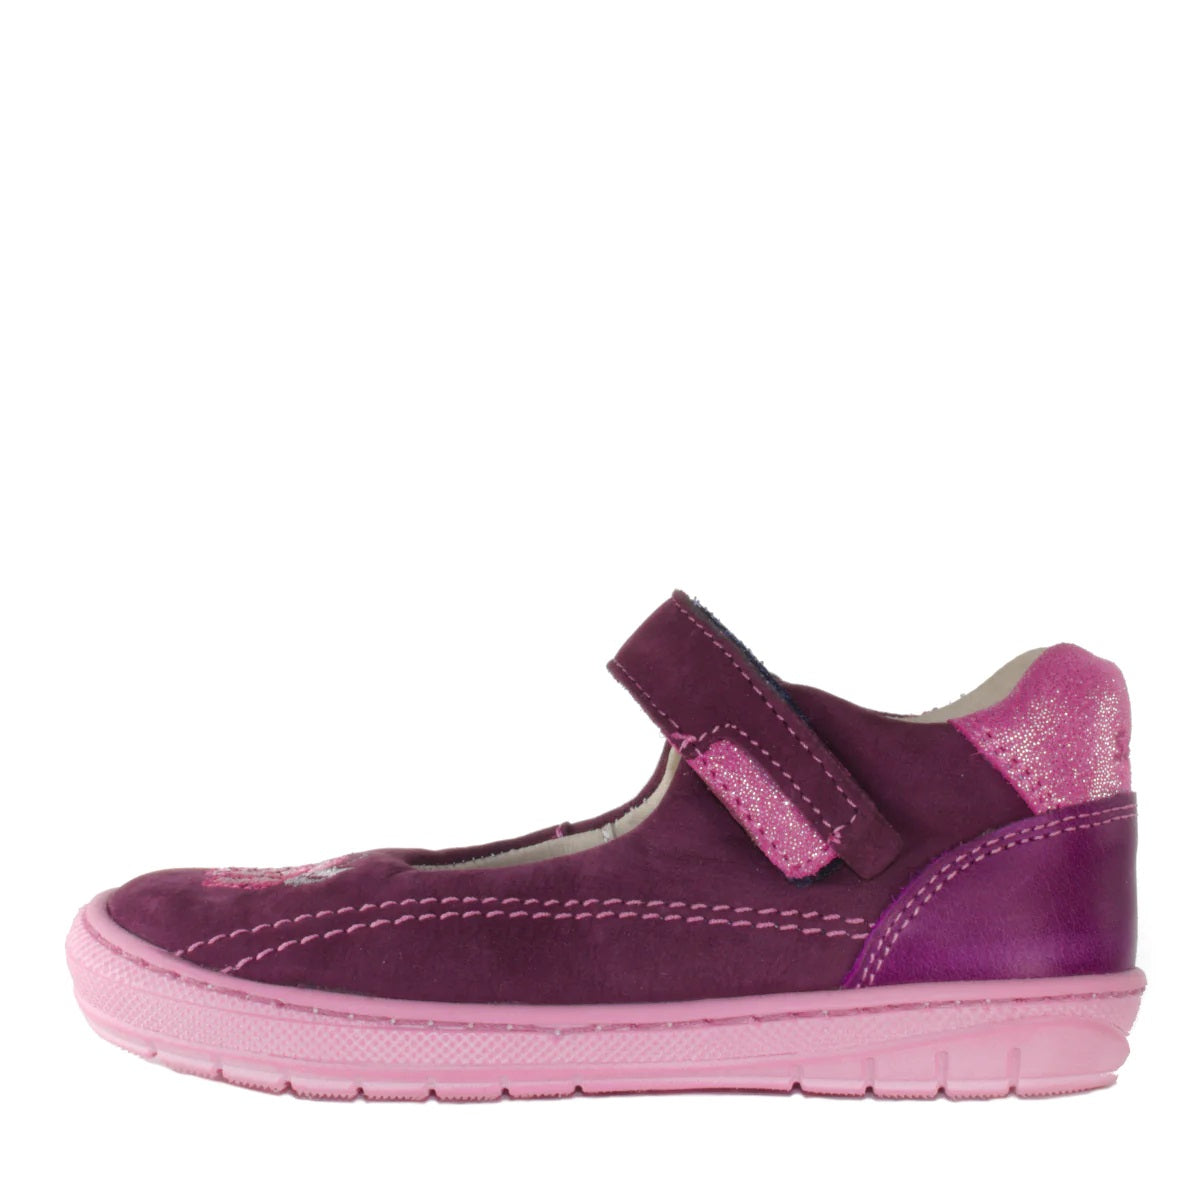 Szamos Kid Girl Dress Shoes In Burgundy Color And Pink Details With Velcro Strap - Made In Europe - shoekid.ca